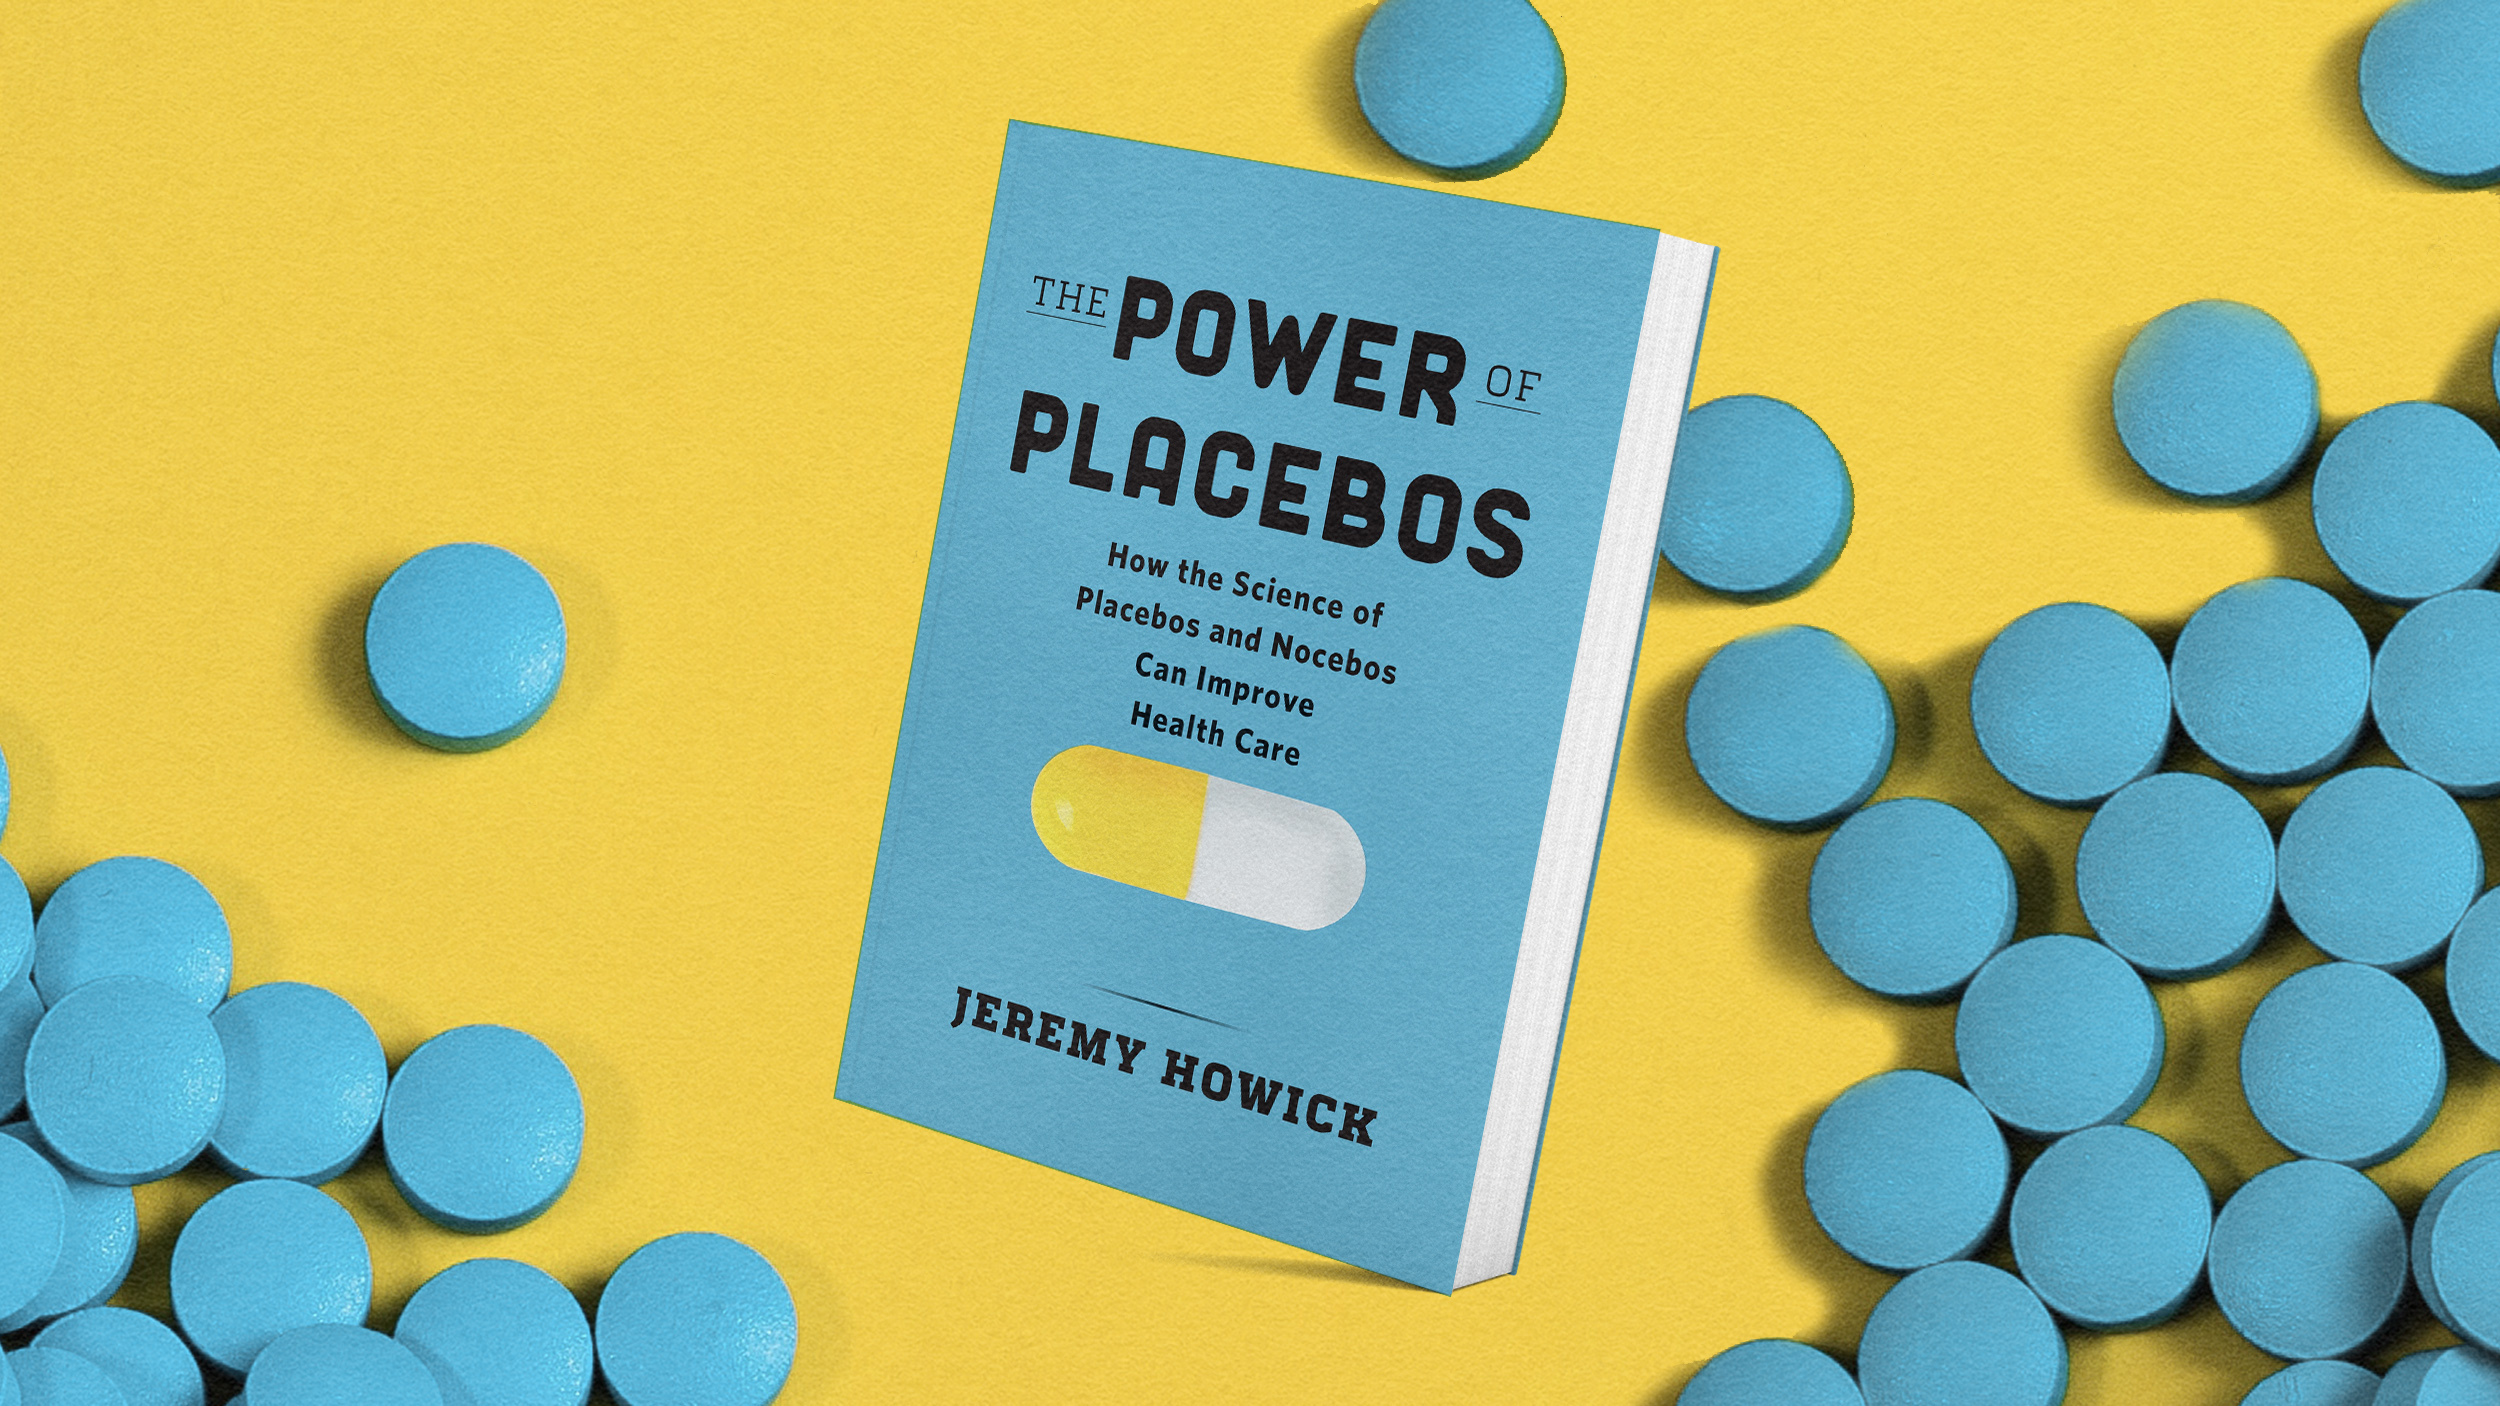 The honest power of placebos.